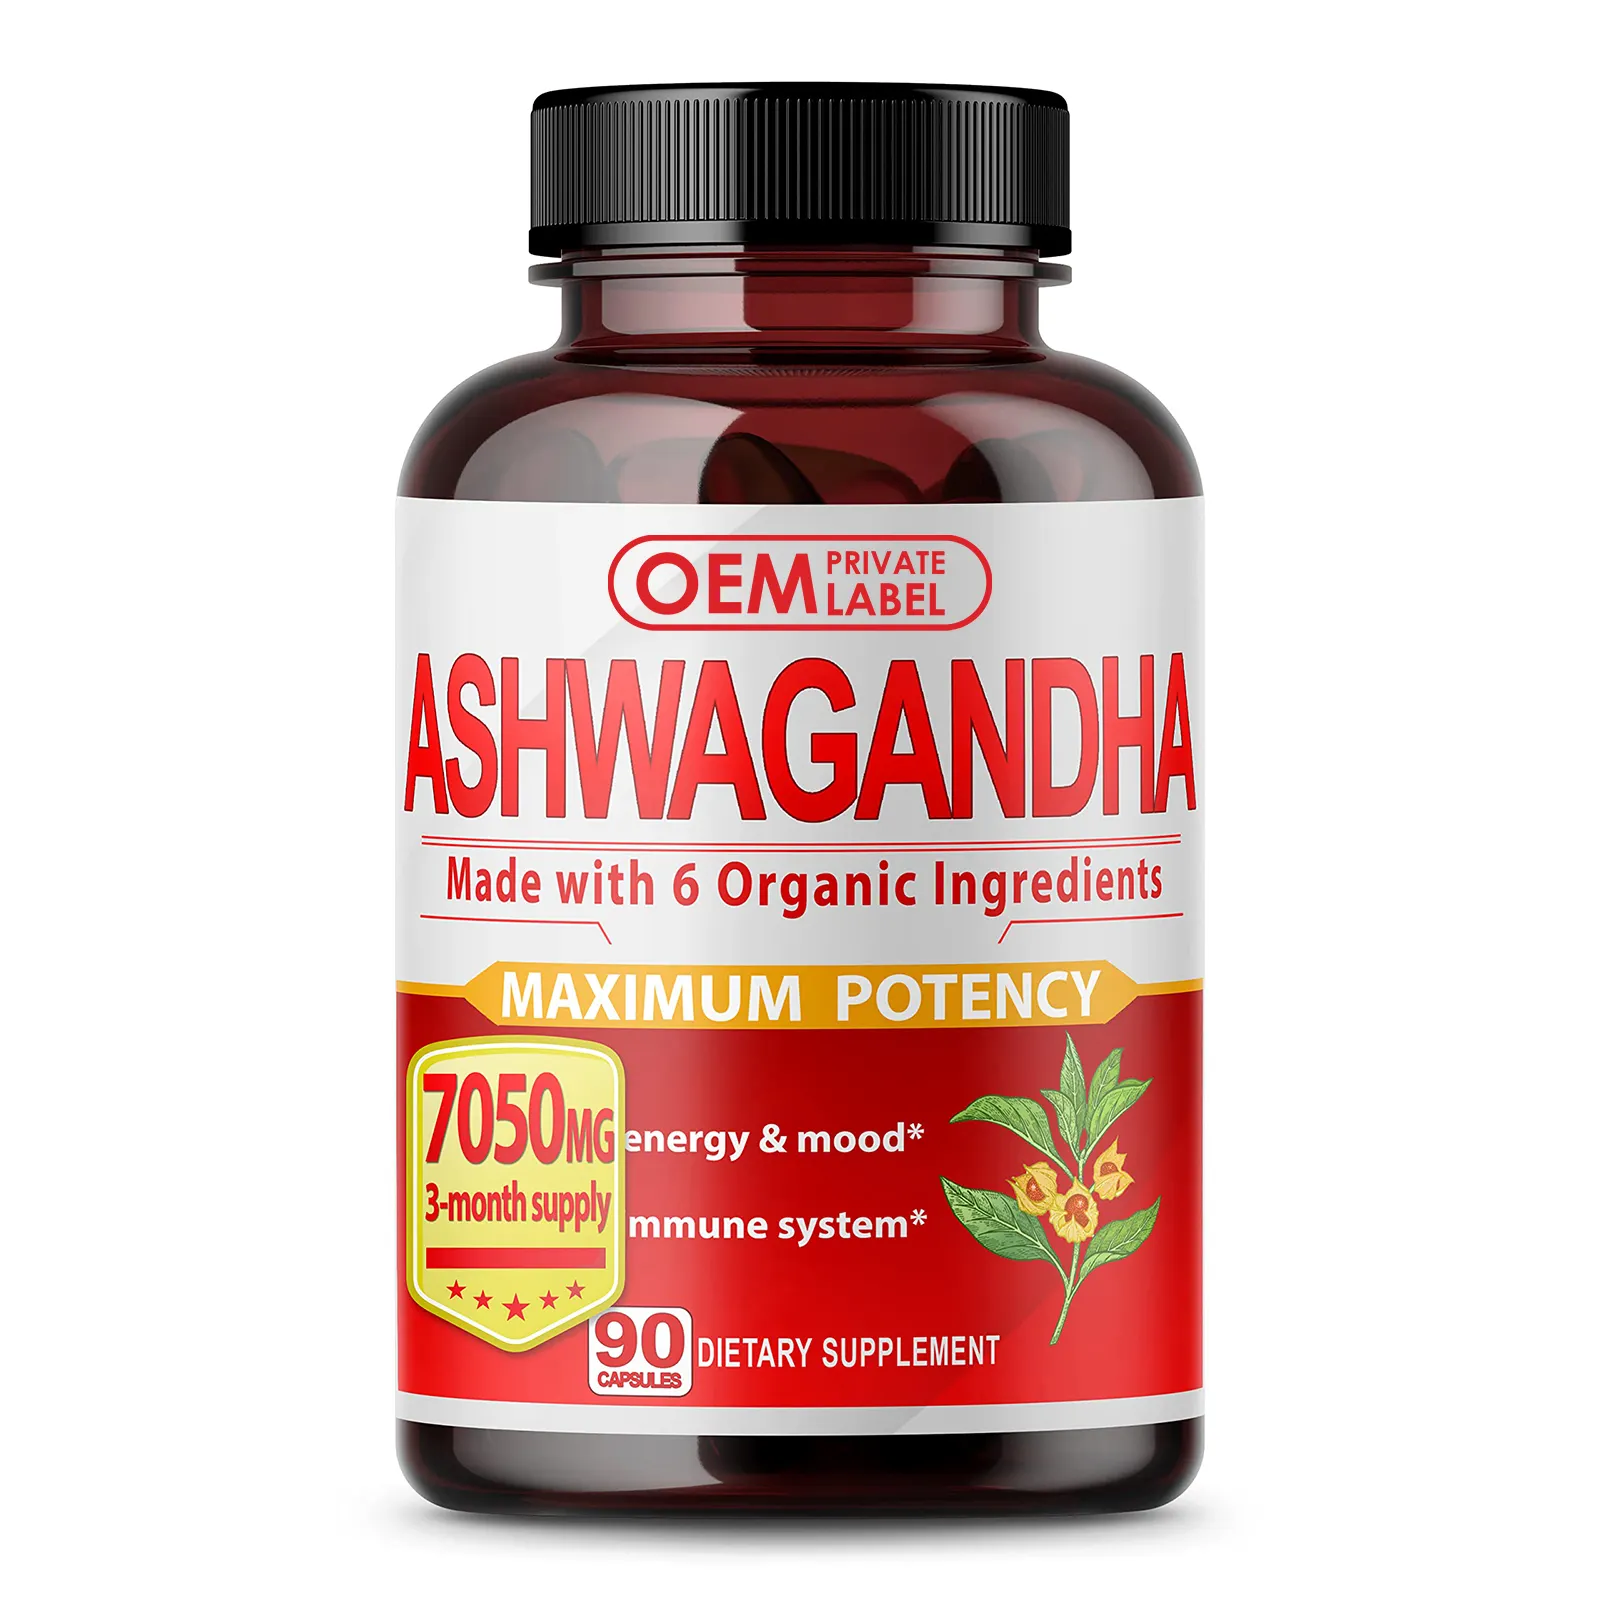 Custom Natural Ashwagandha Root Extract Capsules Supplements 7050mg Stress Relief Energy Supplement Ashwagandha Extract Capsule